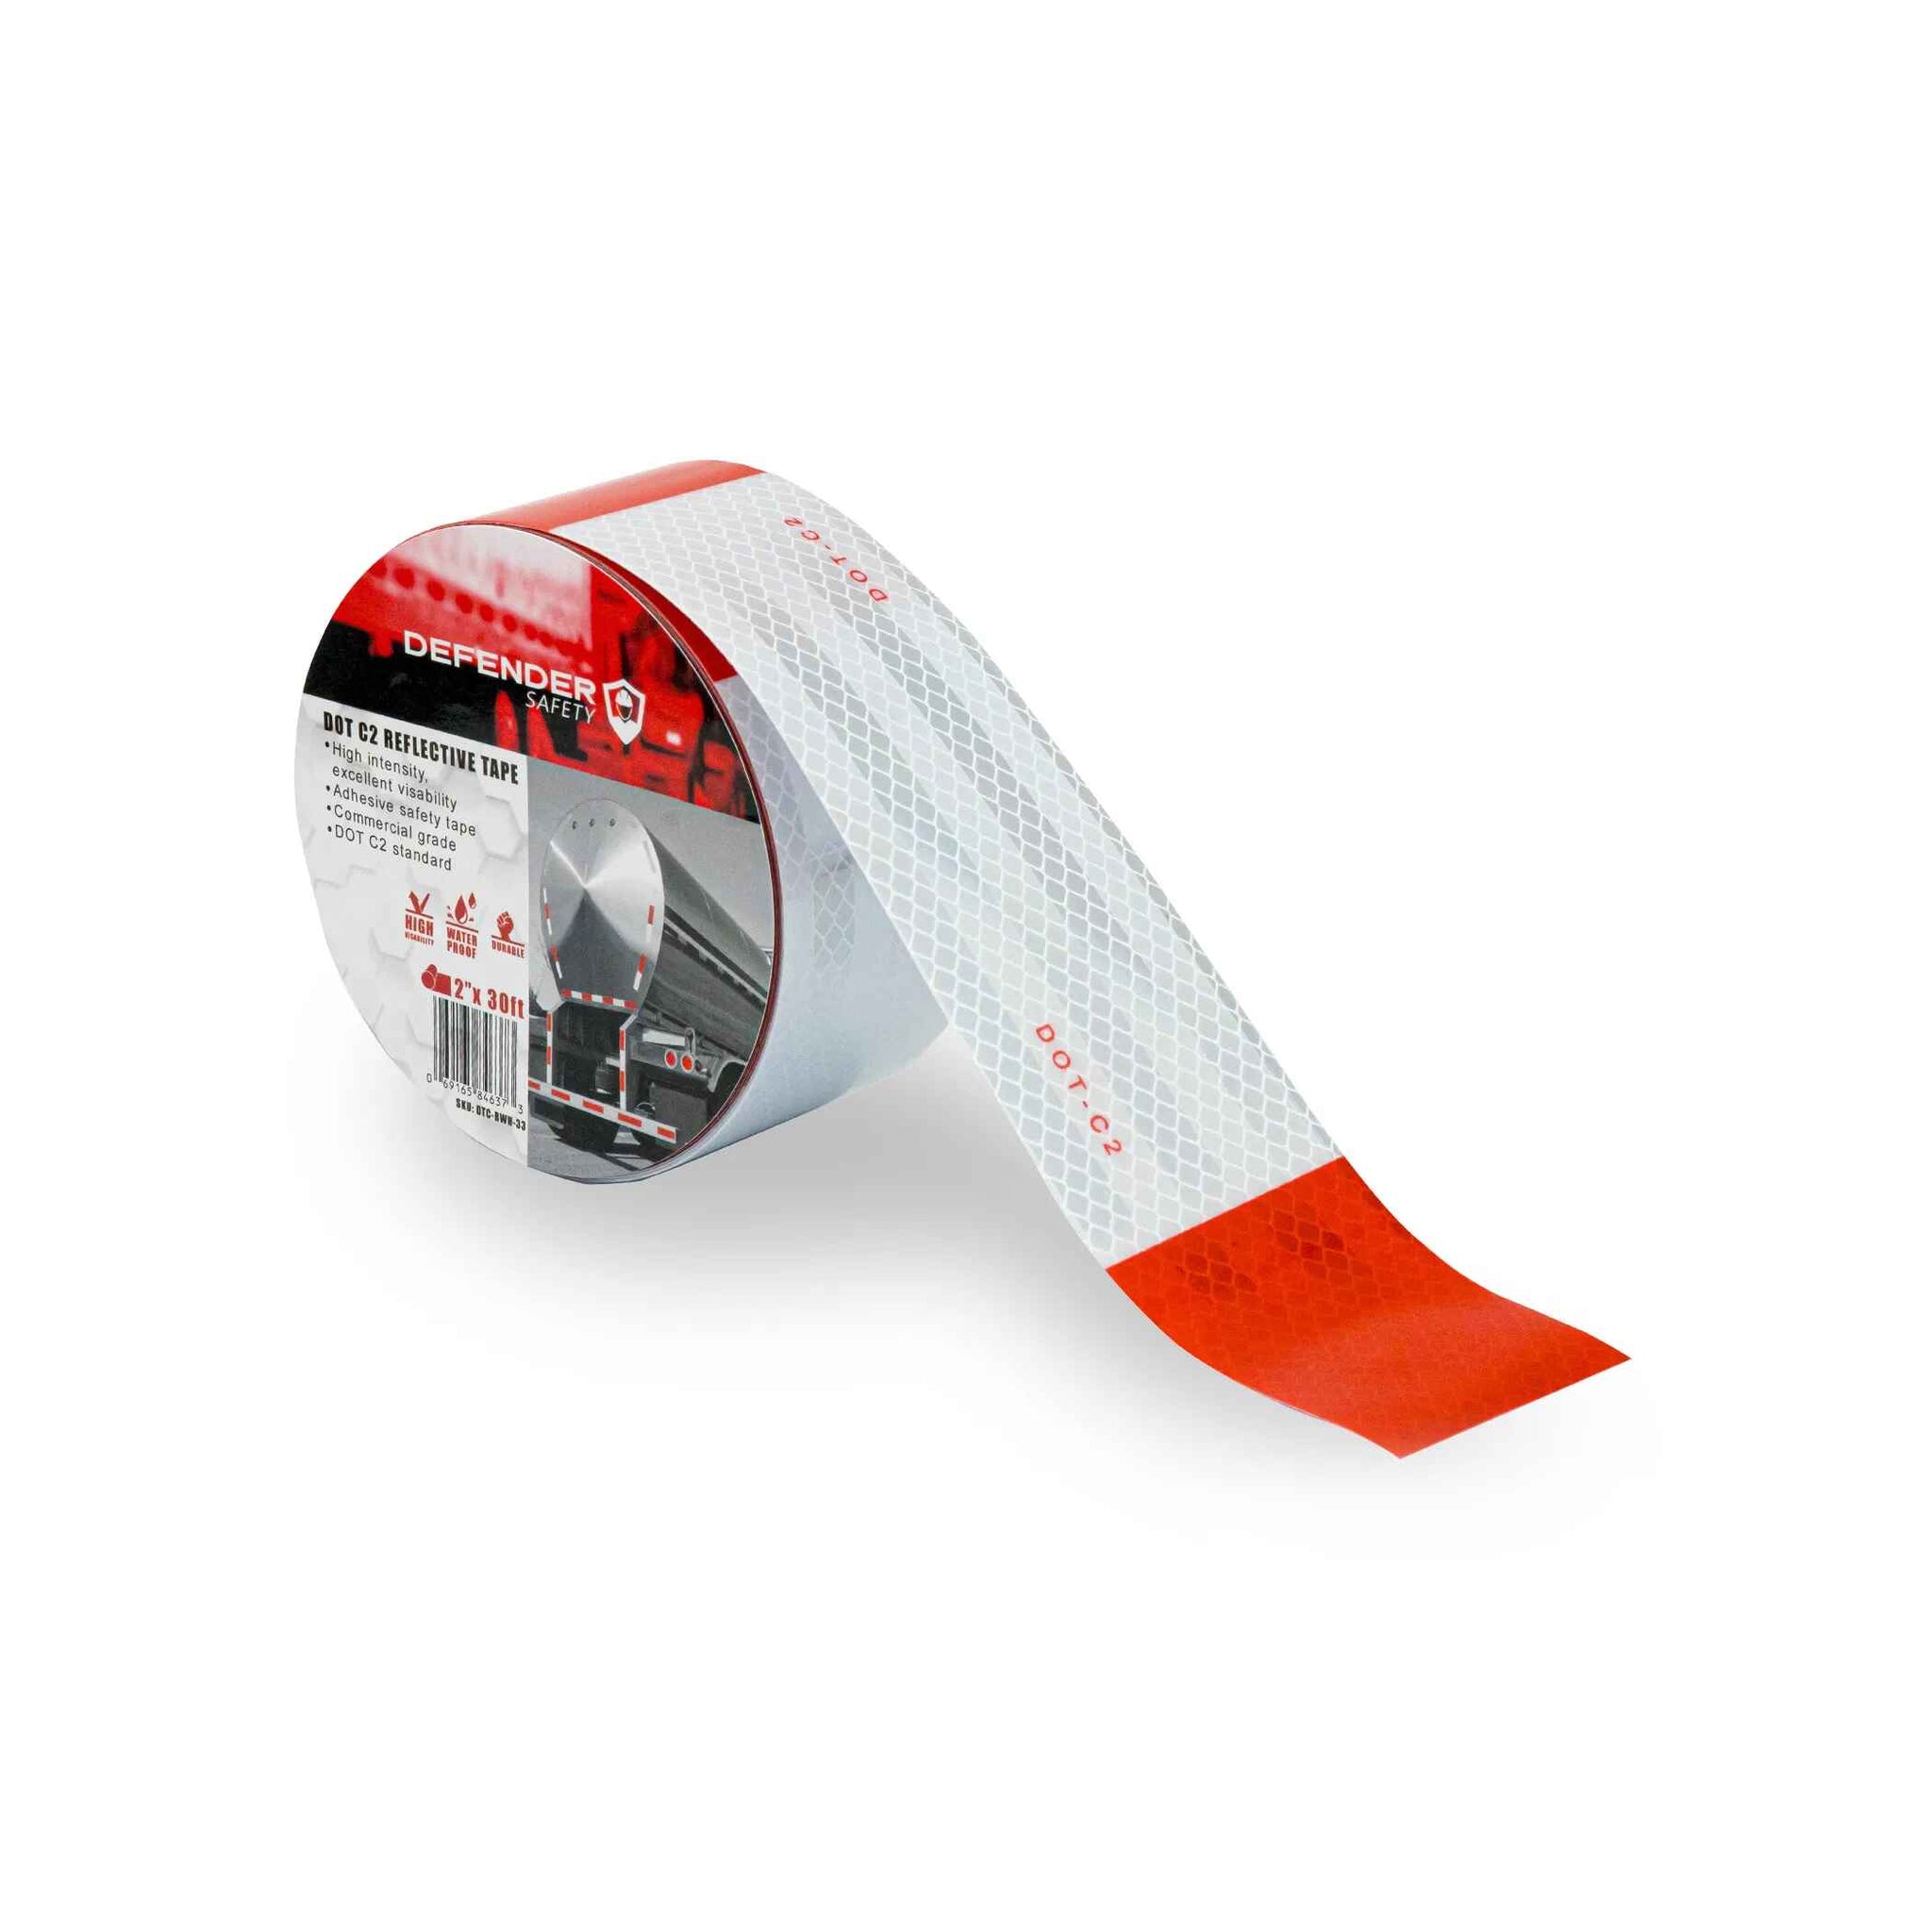 DOT-C2 Conspicuity Safety Reflective Tape Red White For Trailer